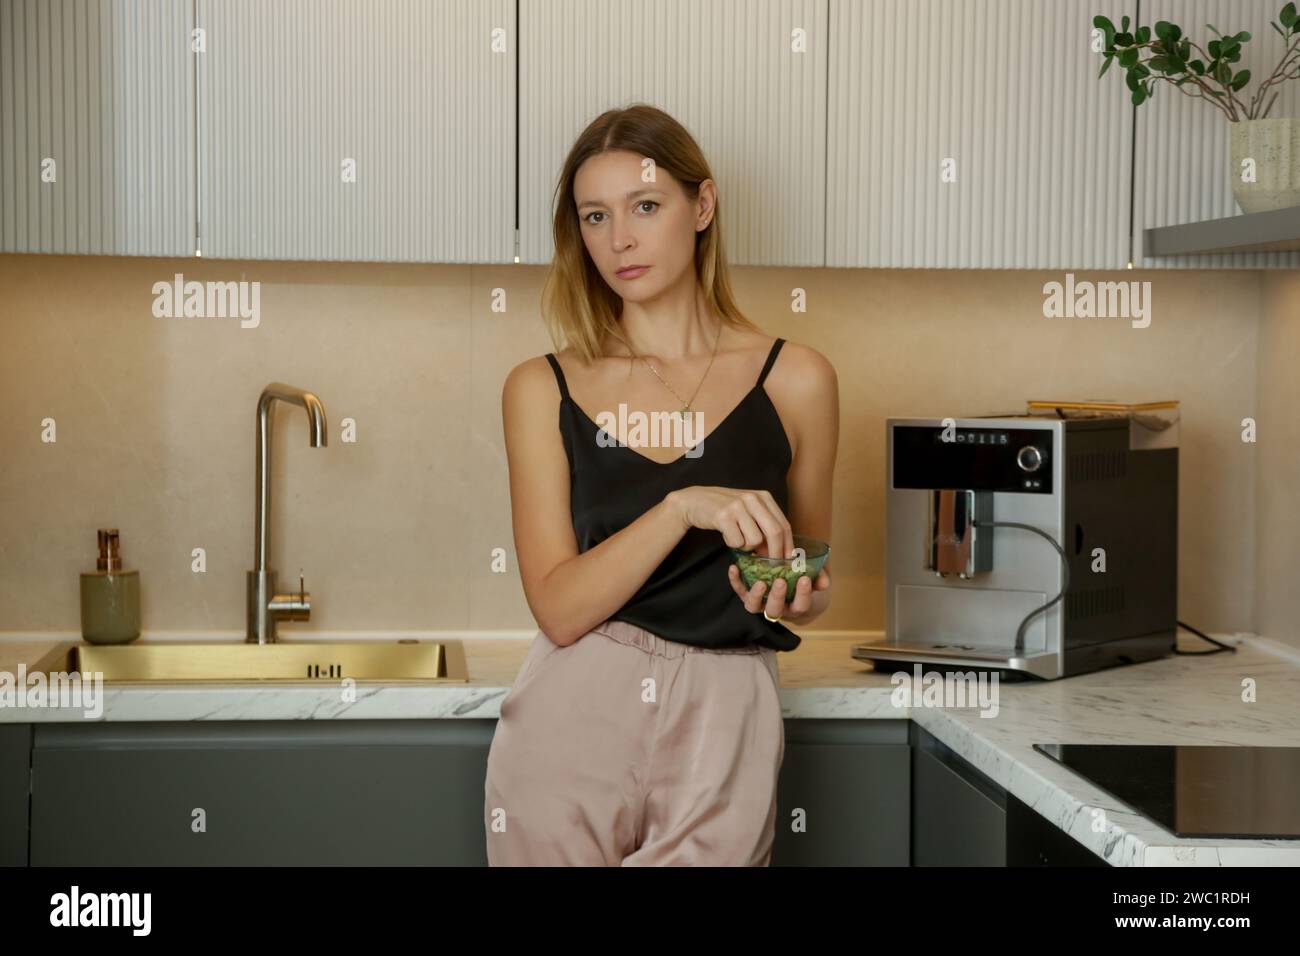 Young serious woman having little snack in the kitchen. Dietary restriction concept. Stock Photo